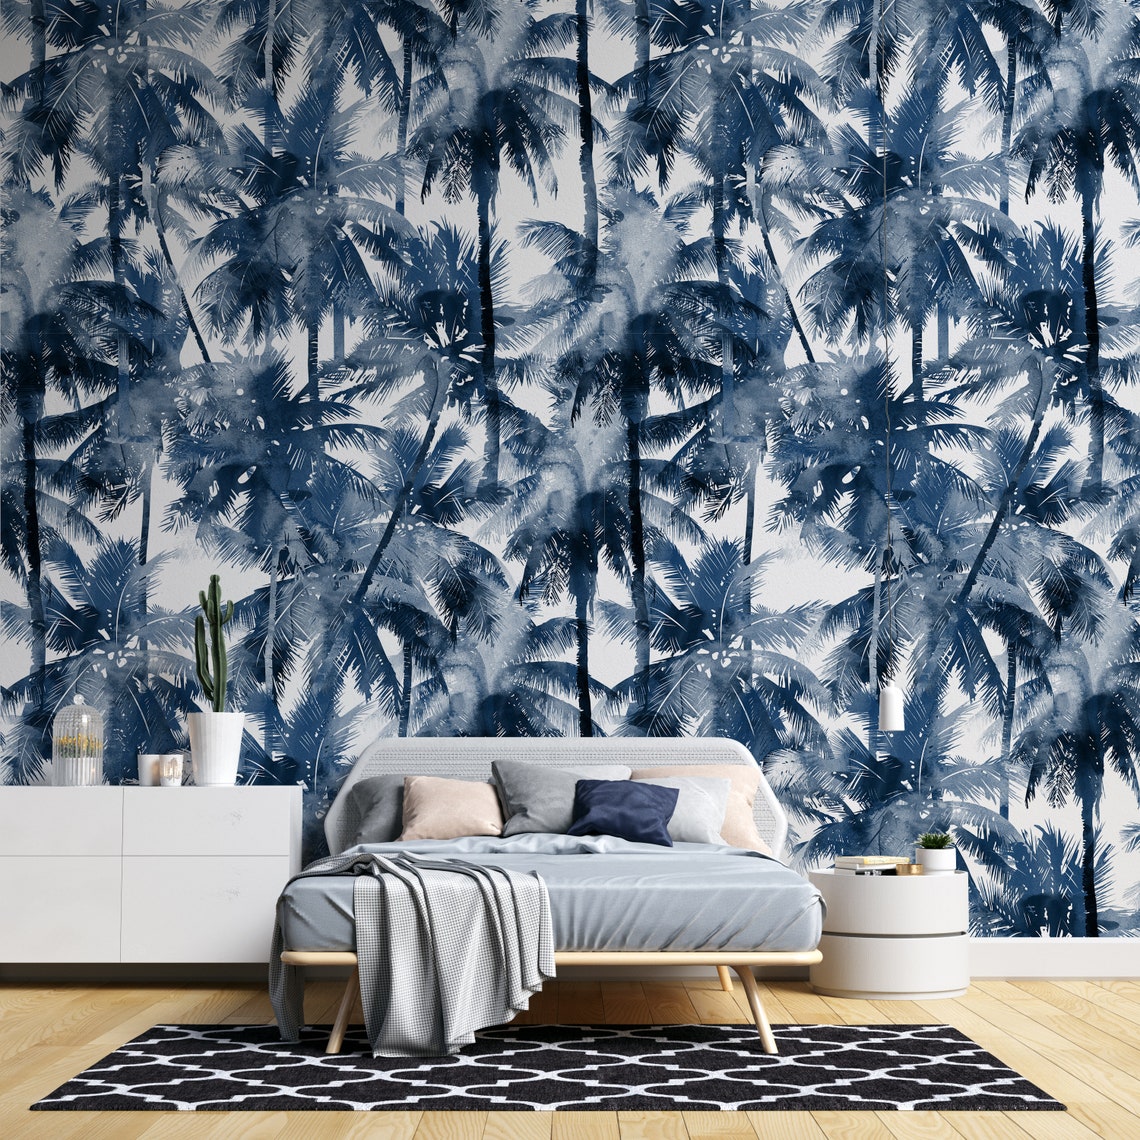 Peel And Stick Wallpaper with Palms Nature Wallpaper for Home | Etsy